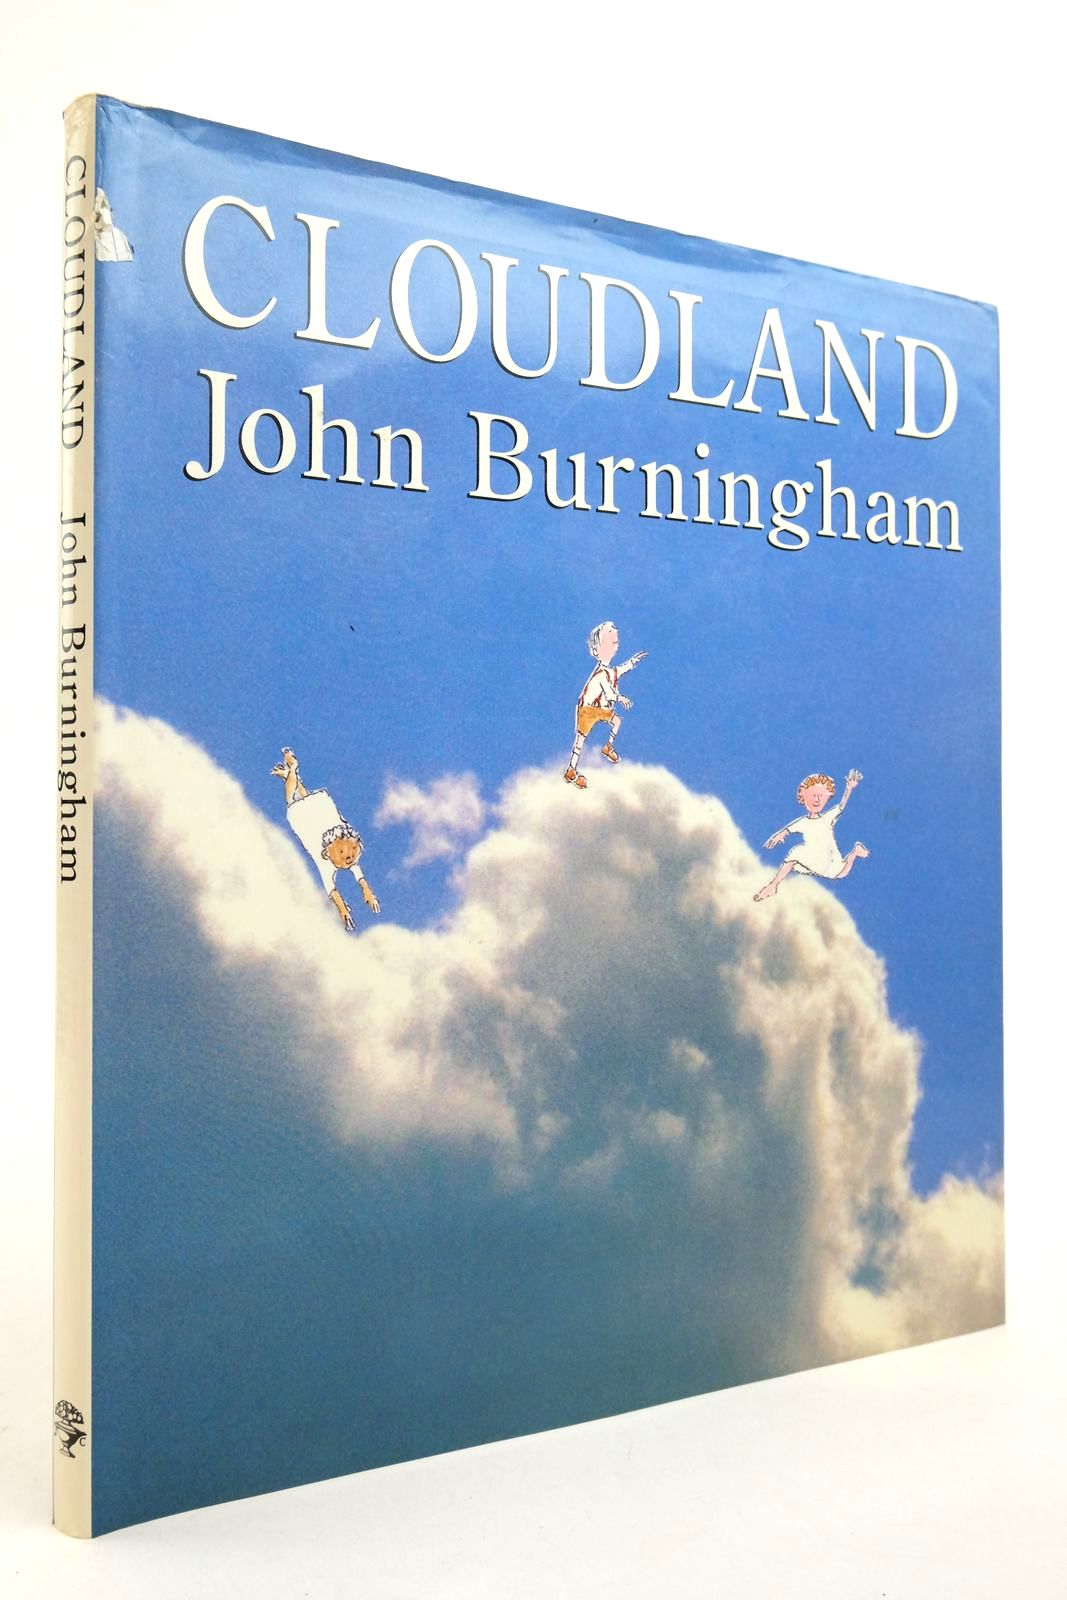 Photo of CLOUDLAND written by Burningham, John illustrated by Burningham, John published by Jonathan Cape (STOCK CODE: 2140333)  for sale by Stella & Rose's Books